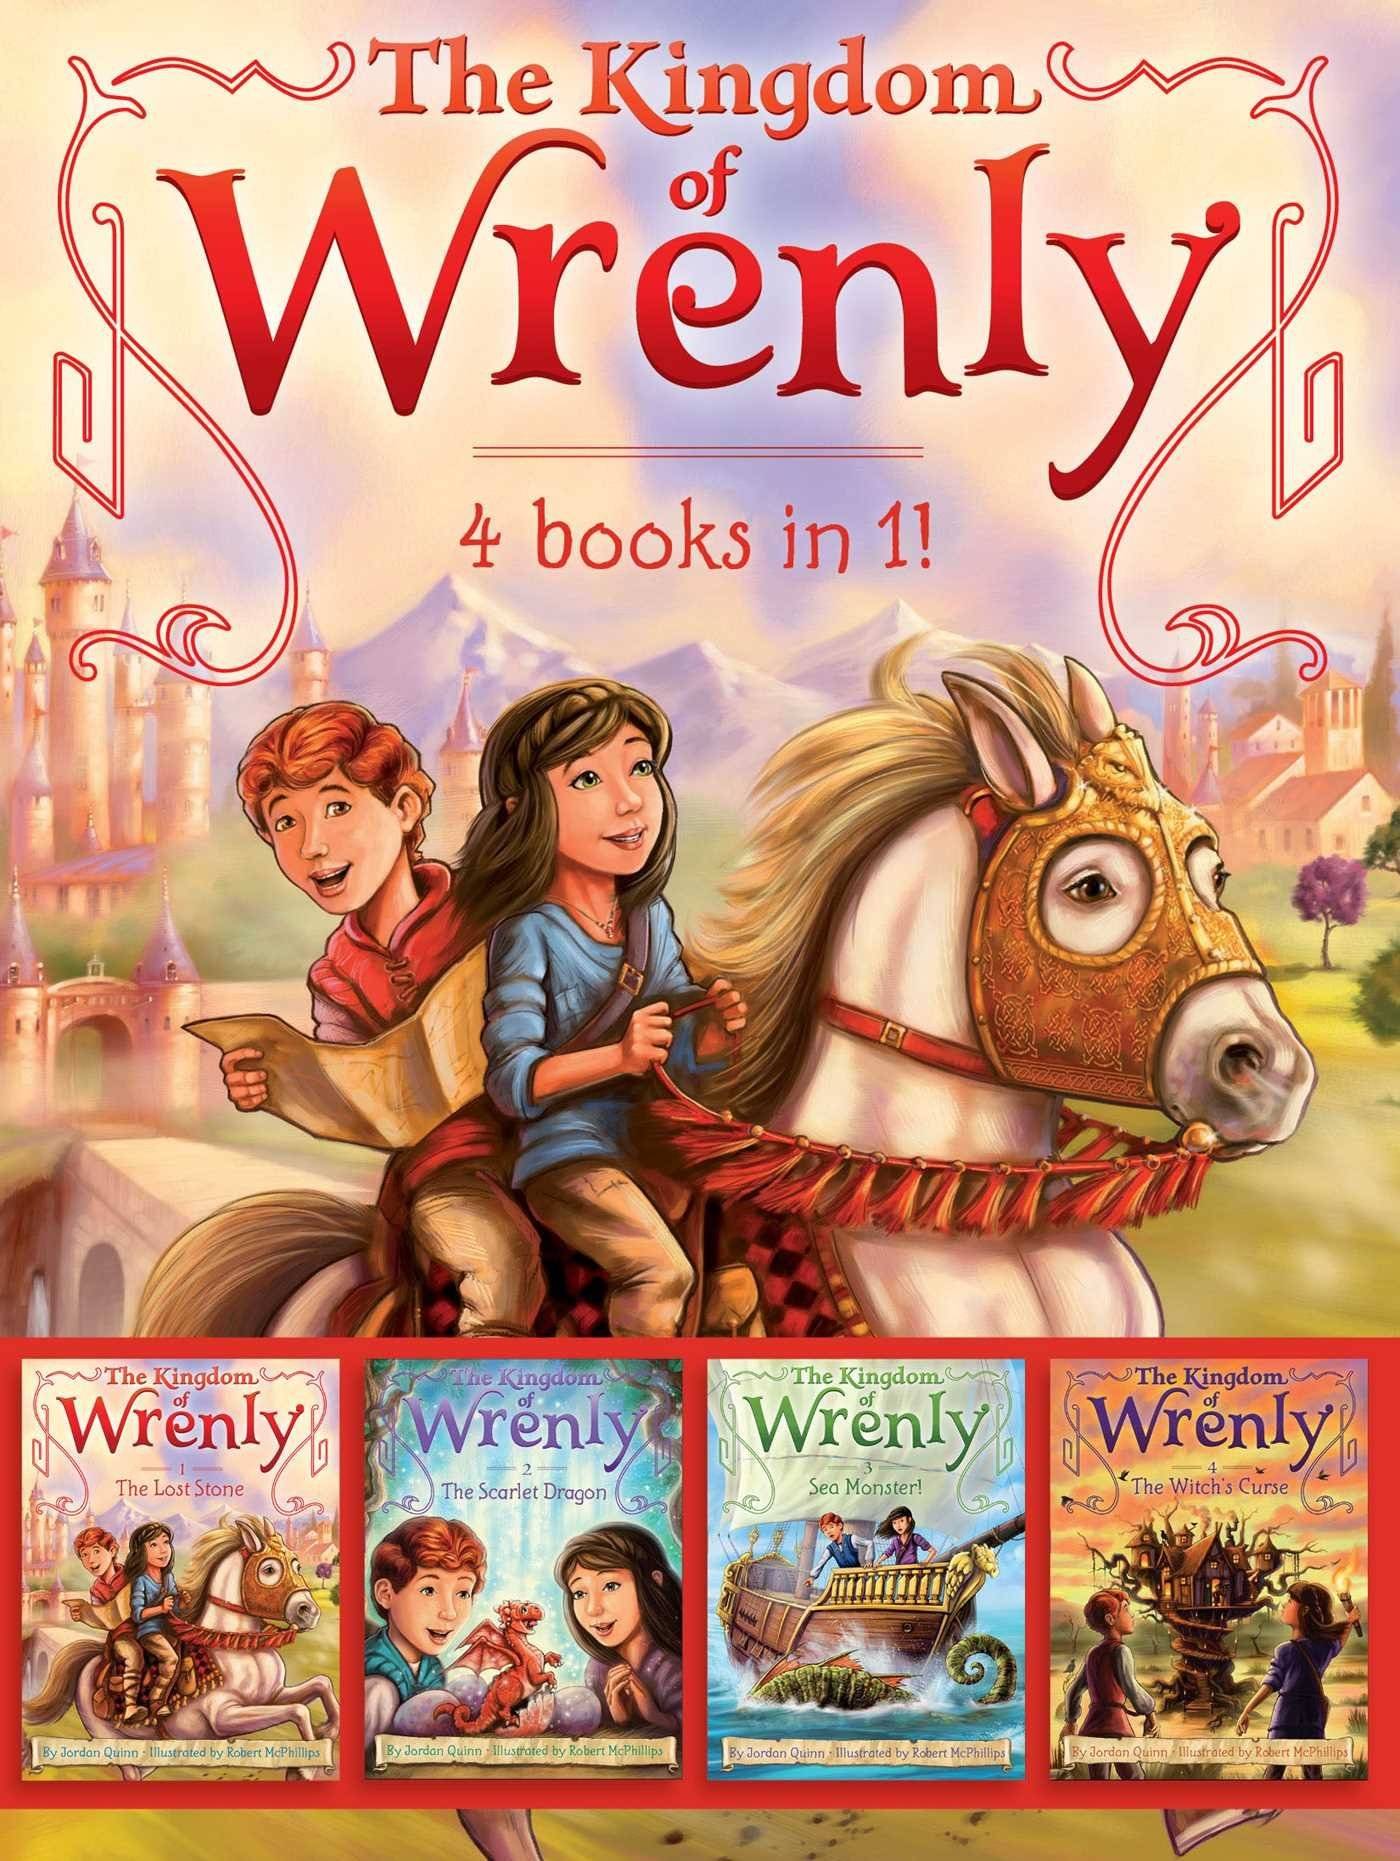 IMG : The kingdom of Wrenly